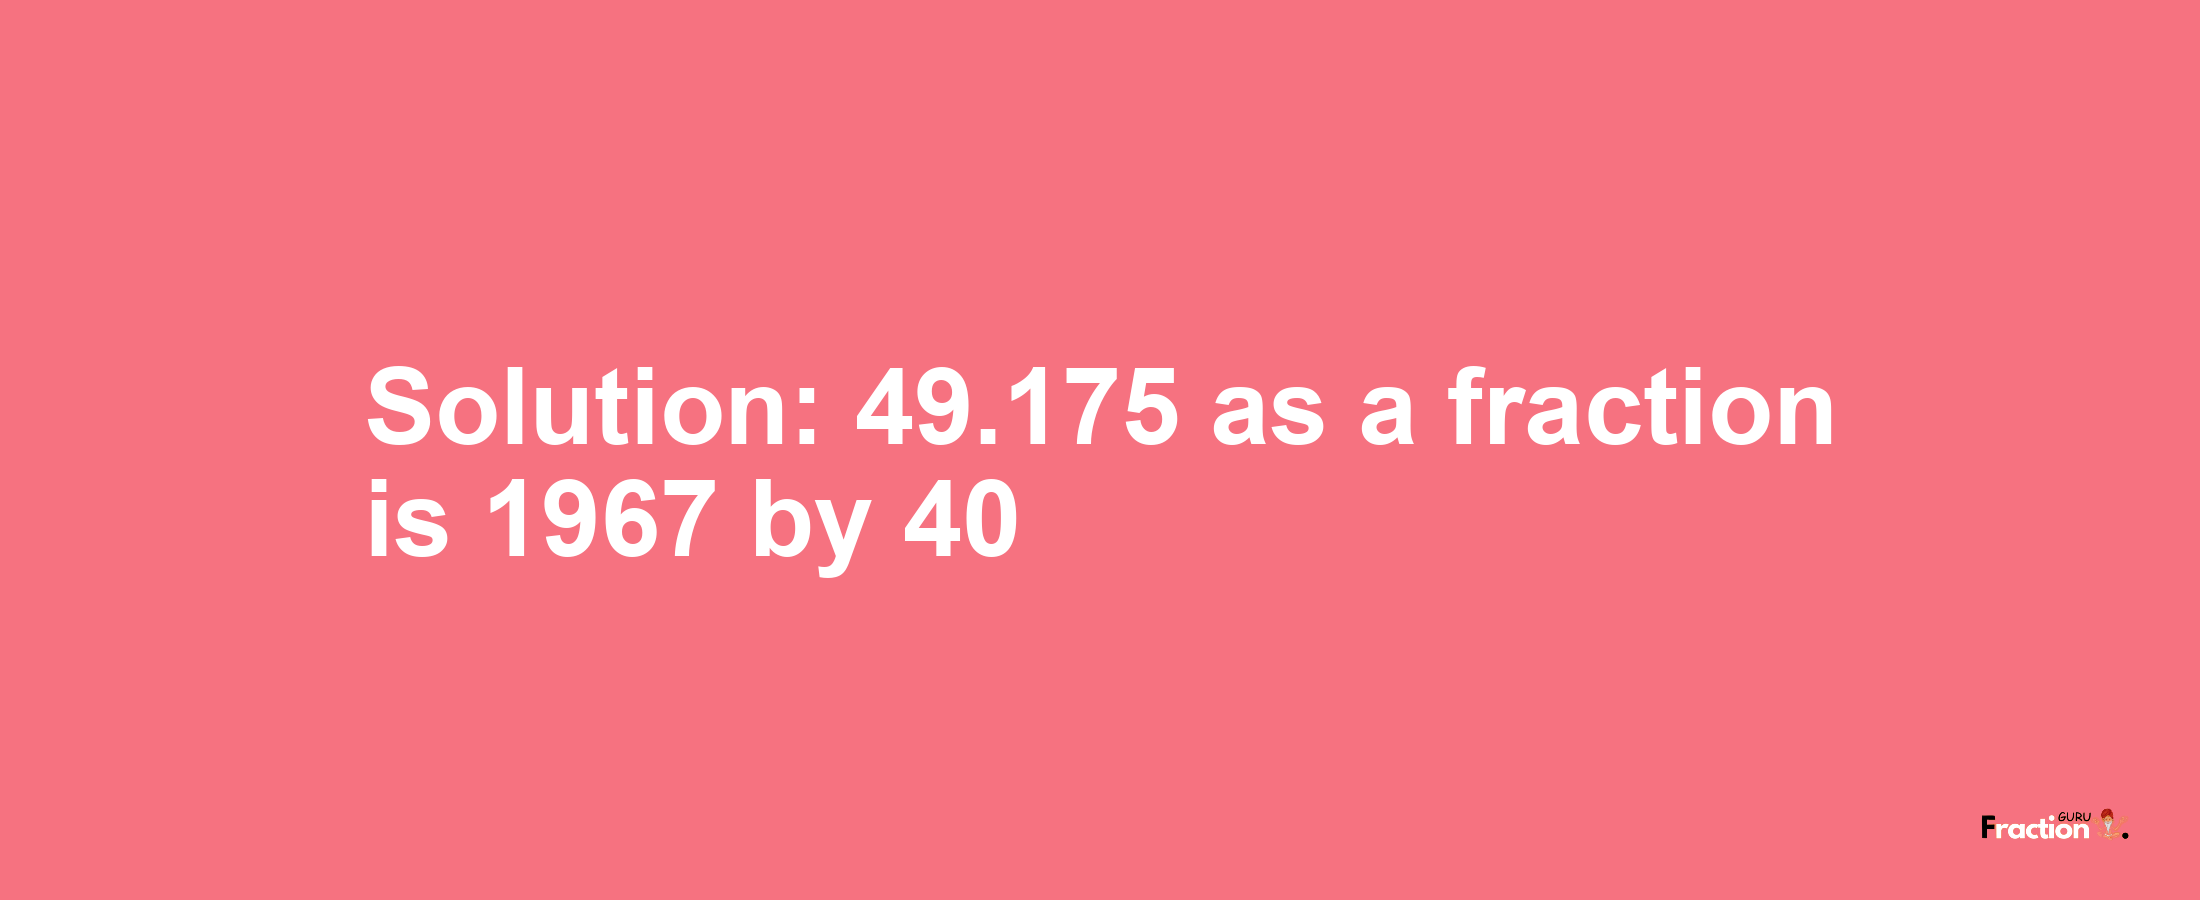 Solution:49.175 as a fraction is 1967/40